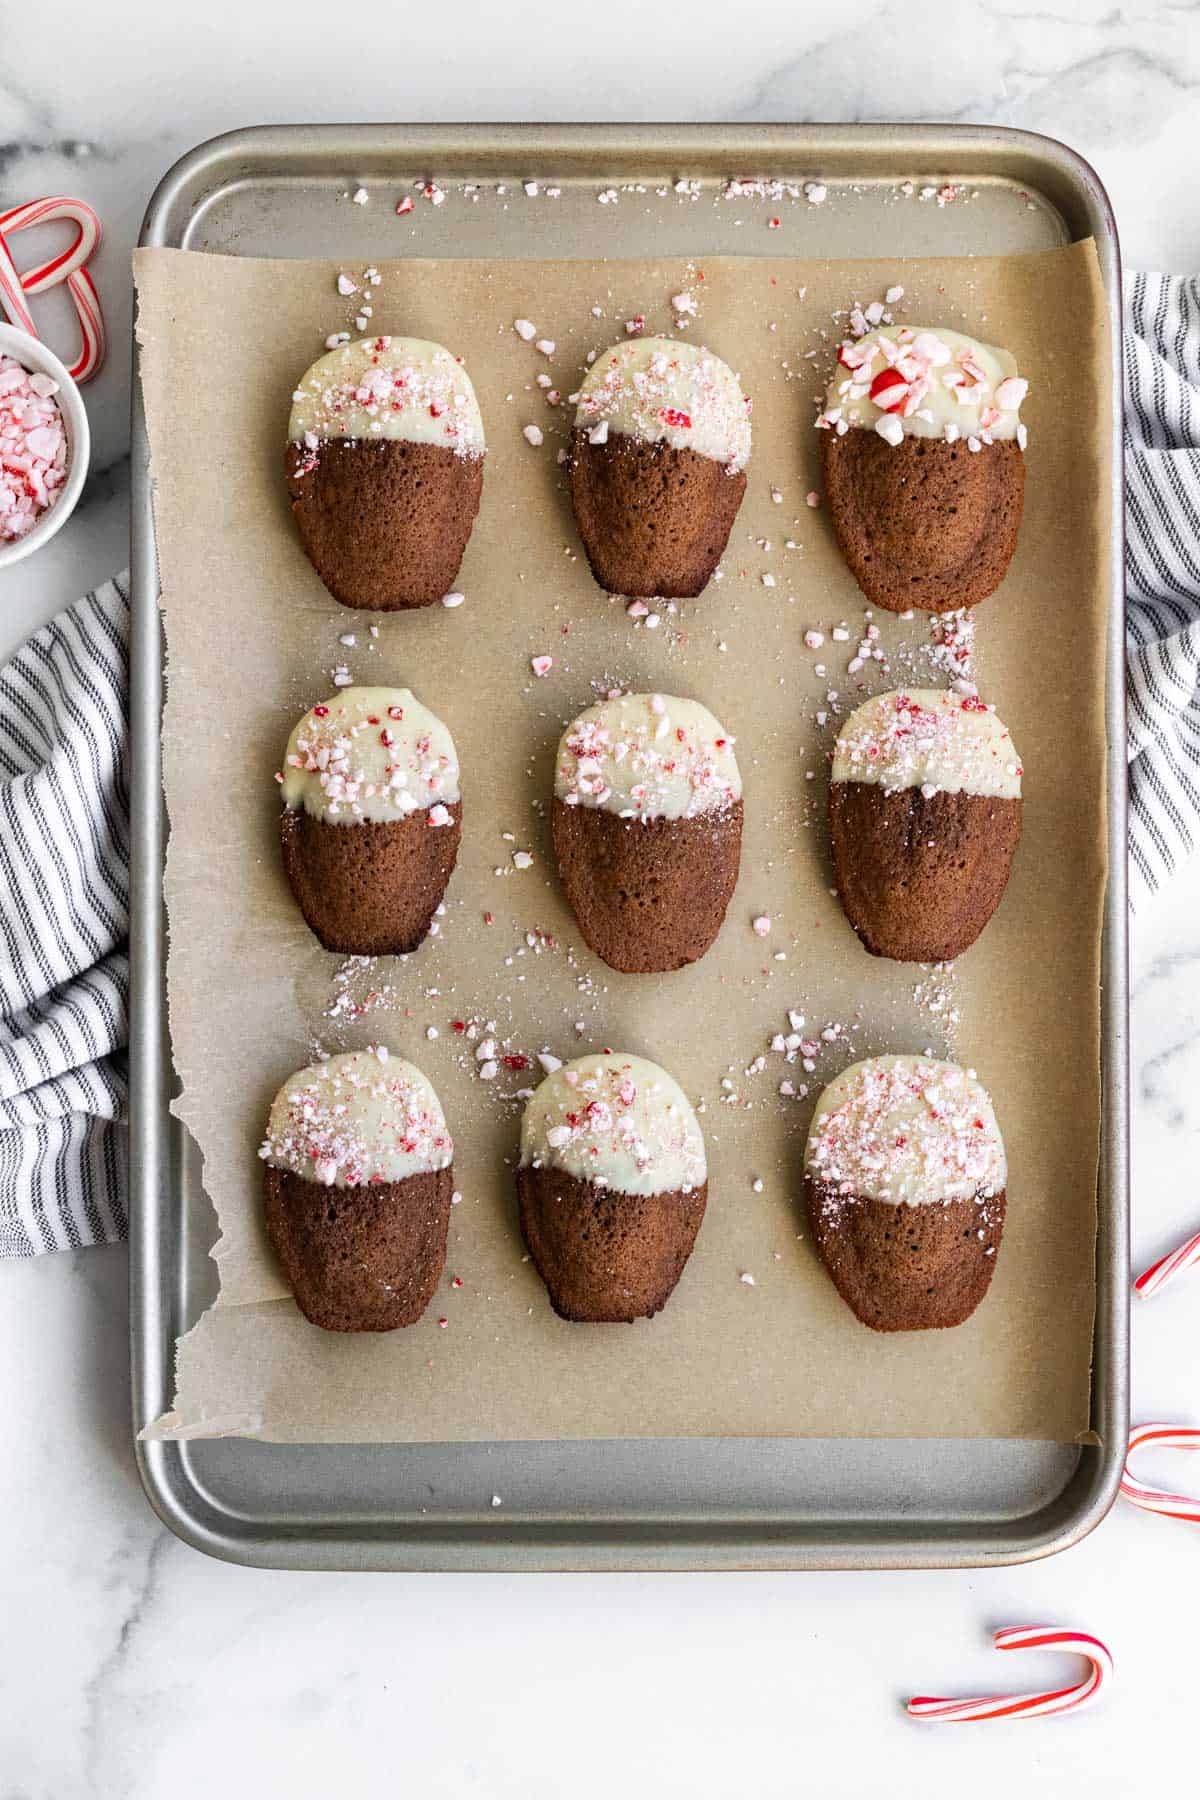 Cookie sheet with chocolate madeleines dipped in white chocolate and sprinkled with peppermint candies